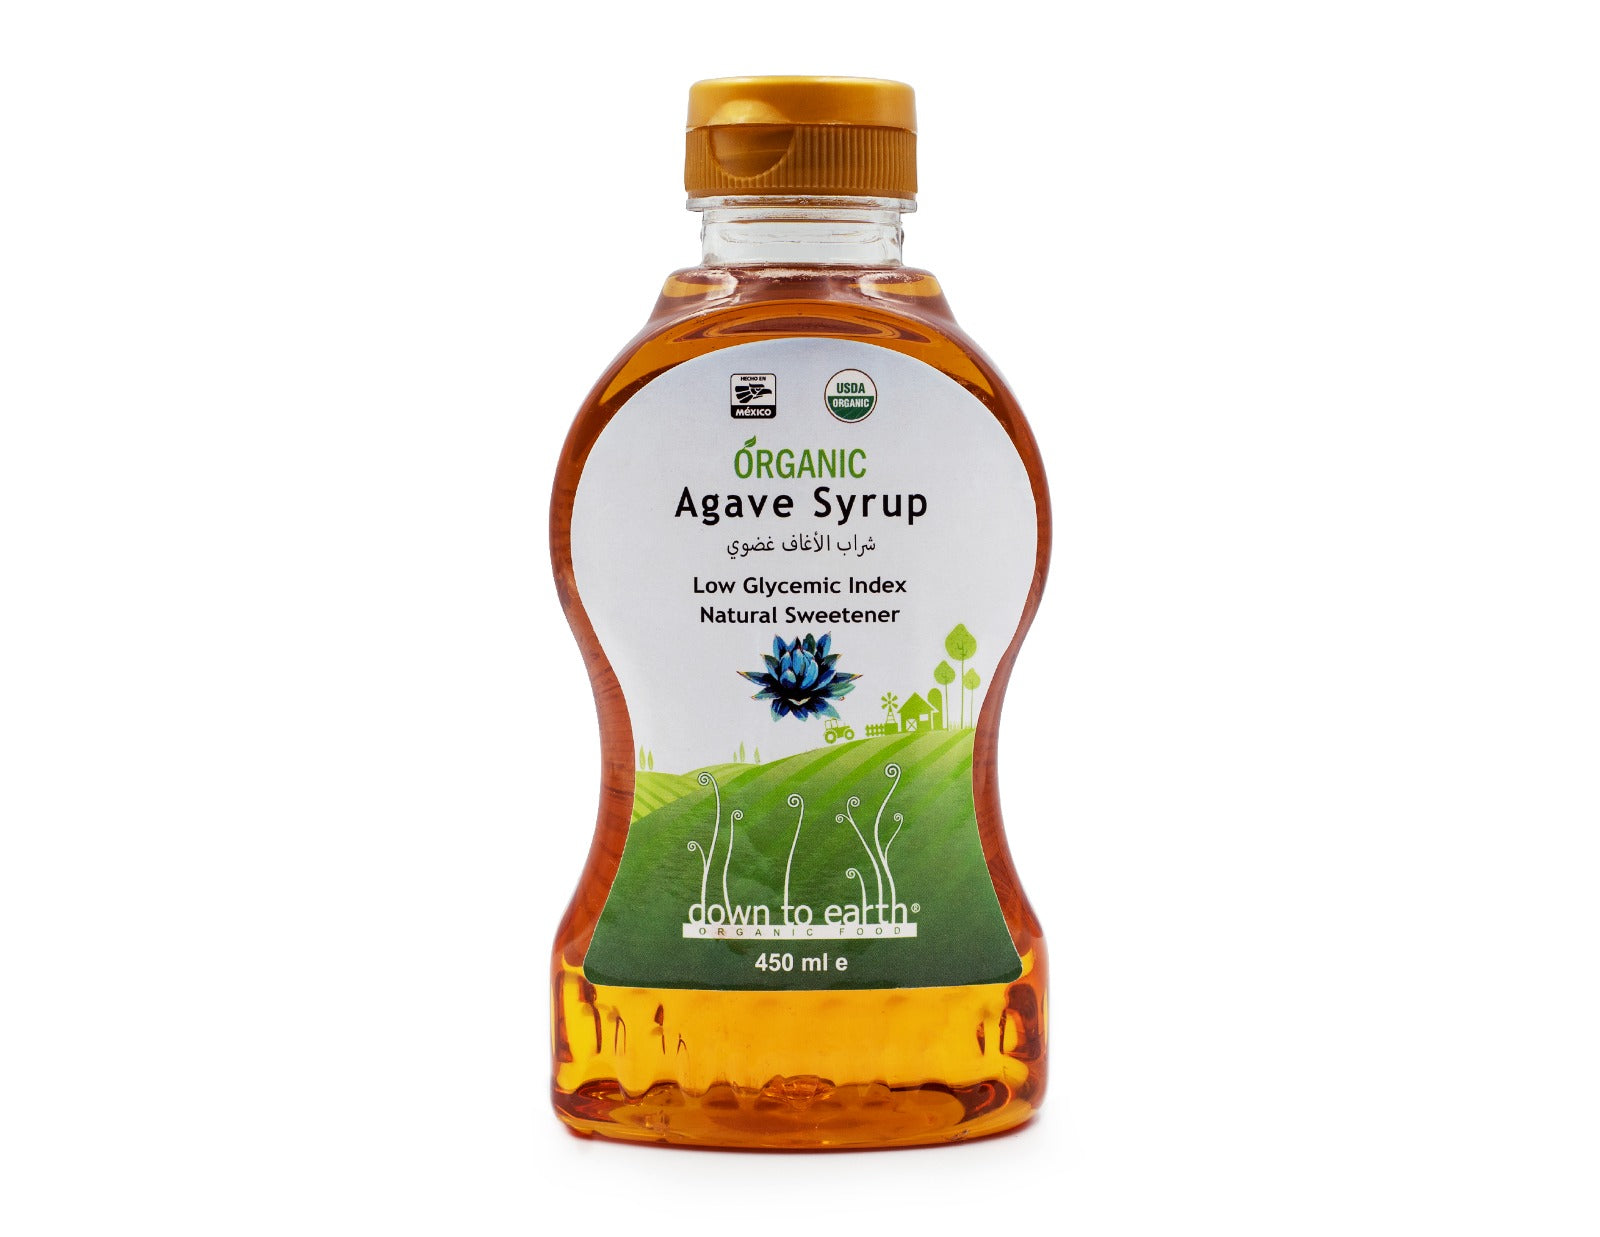 Premium Organic Agave Syrup 450ml - Your Natural Sweetener Choice